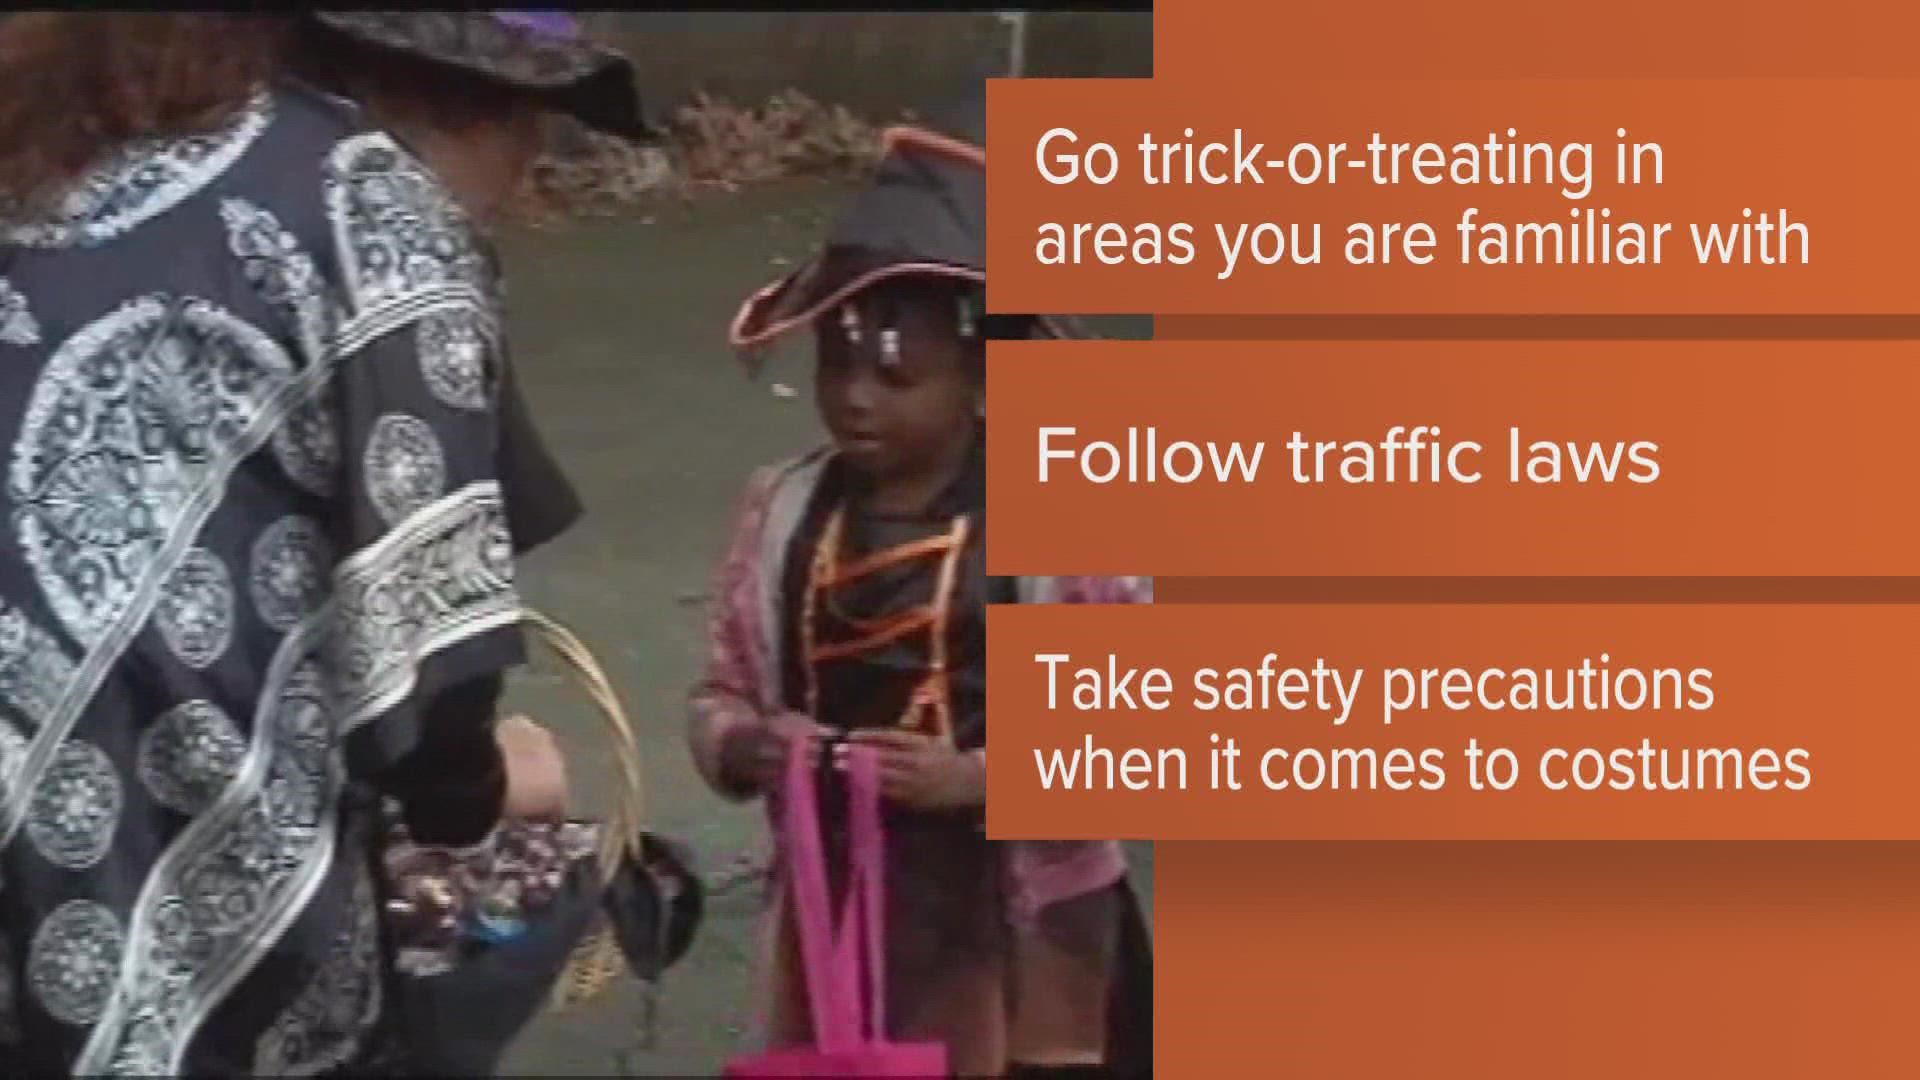 Knoxville police want you to keep safety top of mind as you head out the door tonight for Halloween.